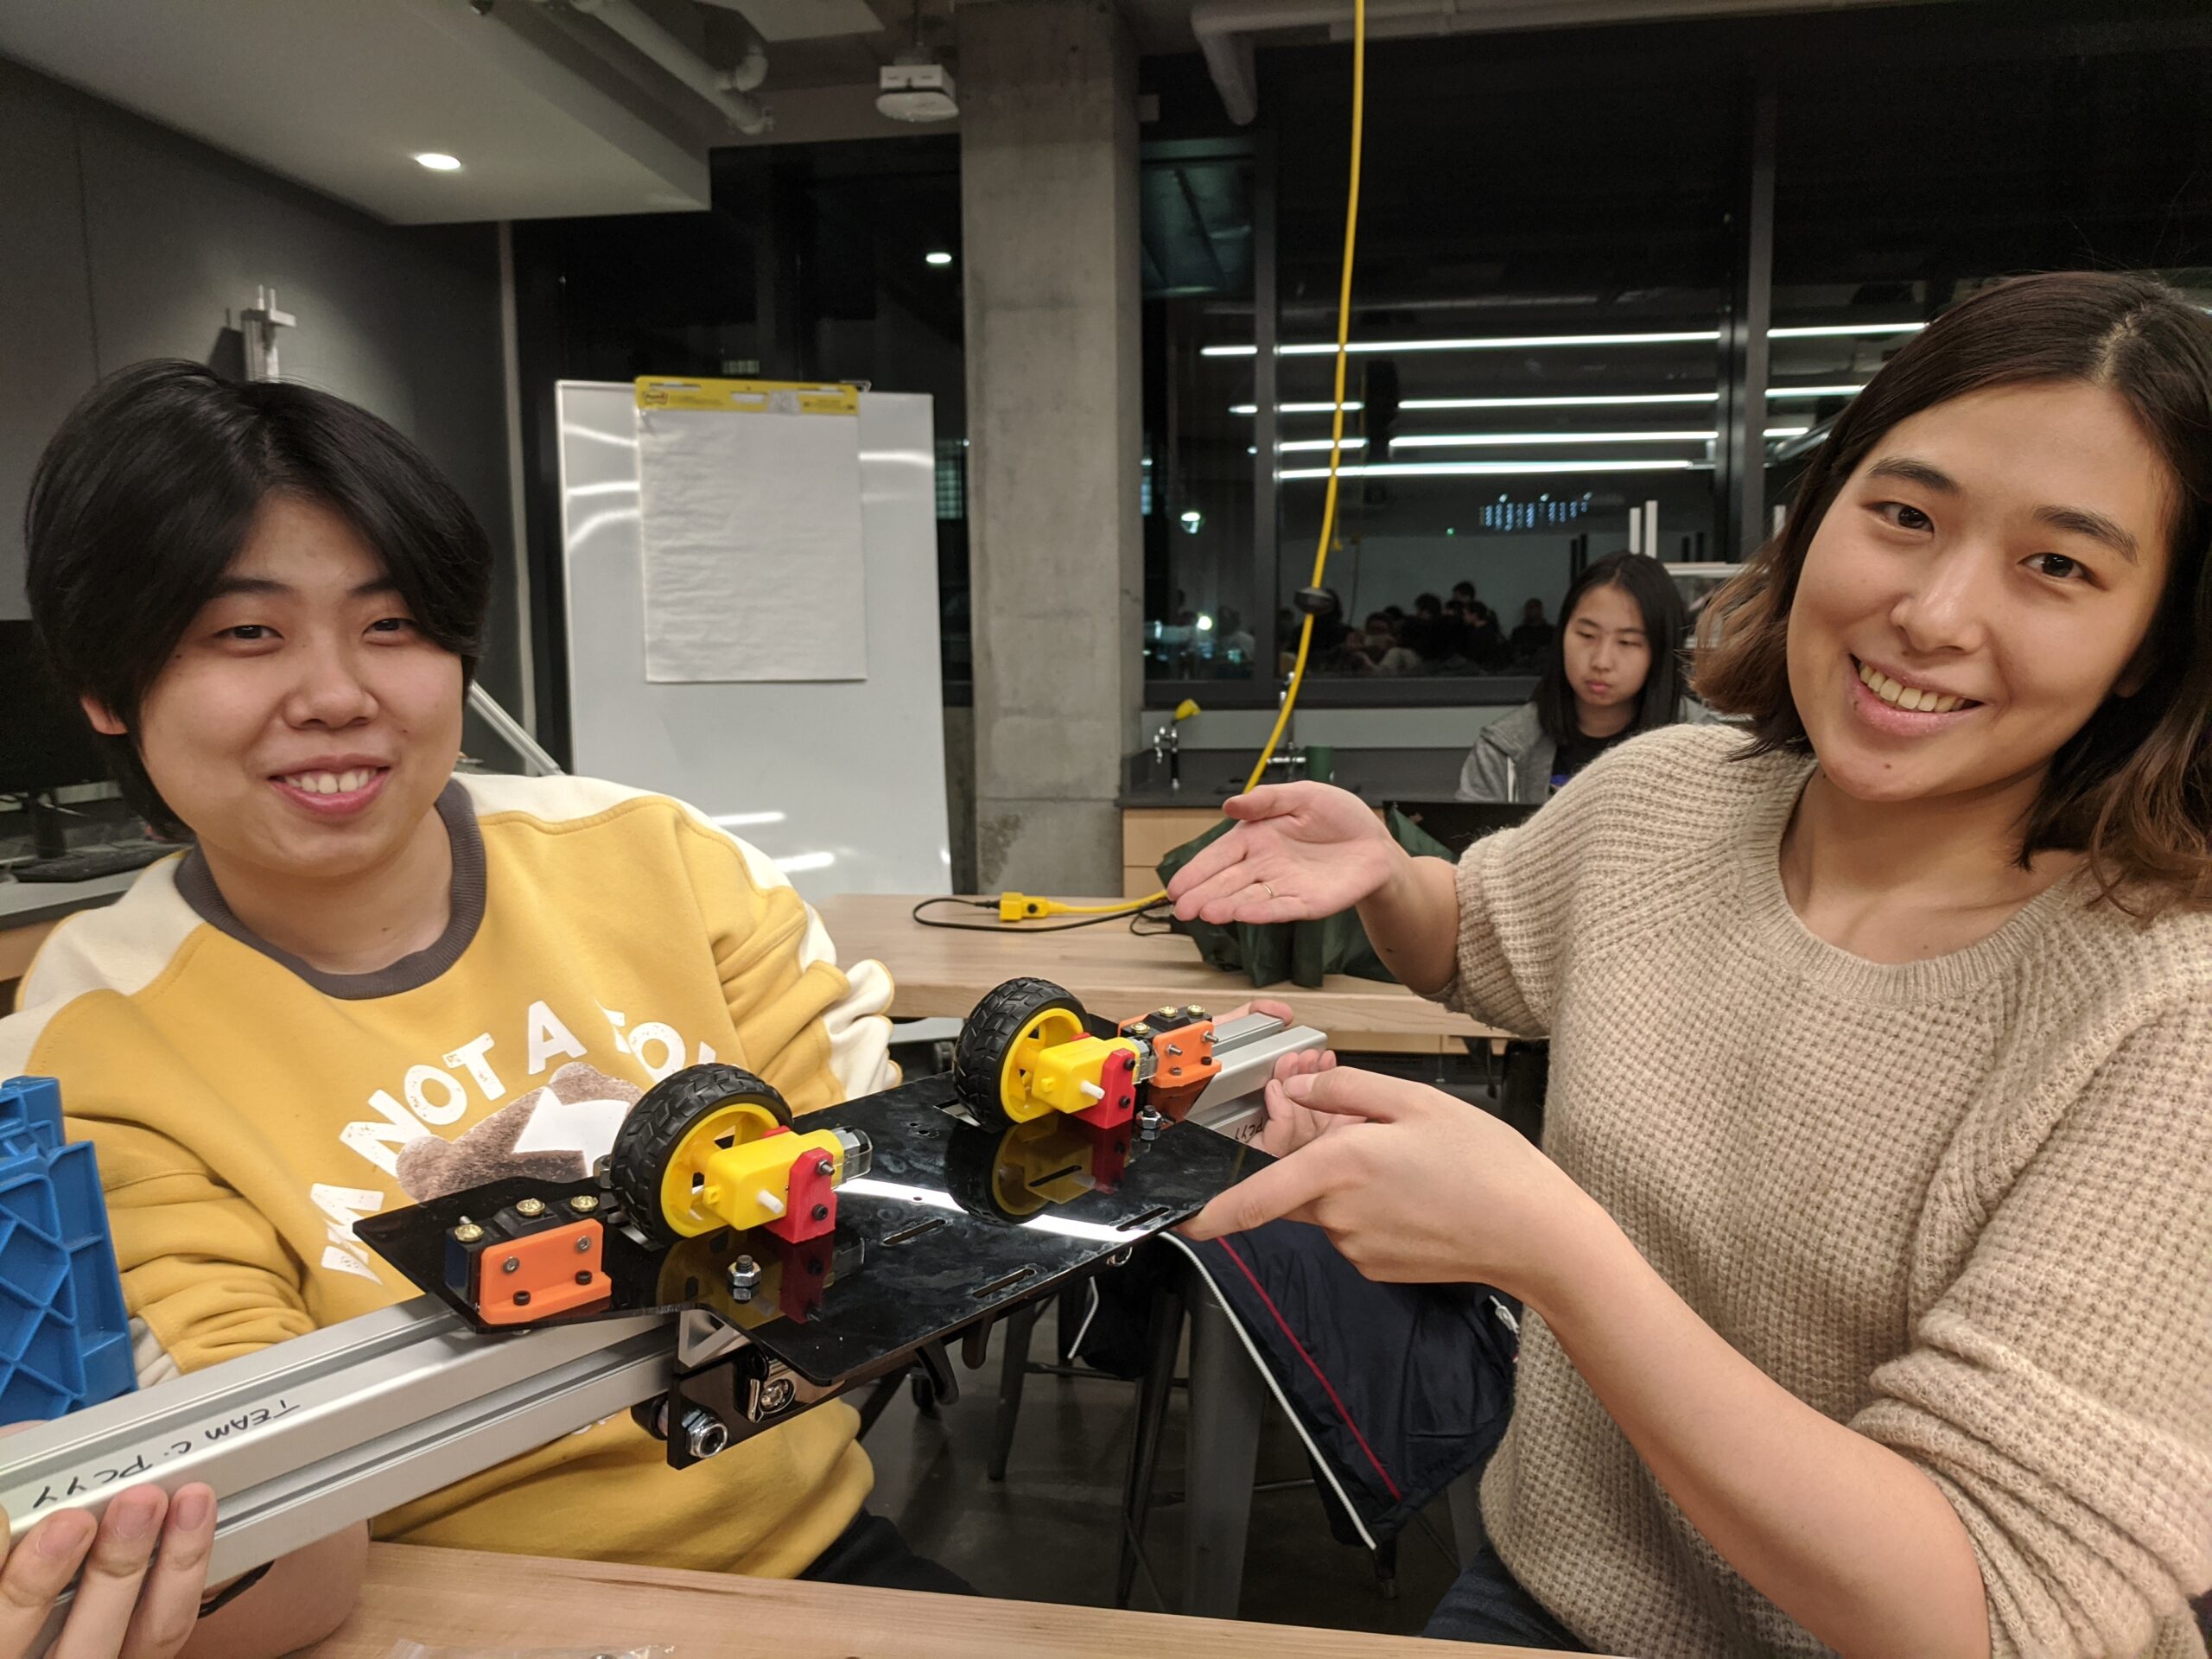 Another dream team. From left, Yingjia Hu and Yuree Chu, both in the Master's of Mechanical Engineering program. Showing the preliminary "carriage" for the window washer